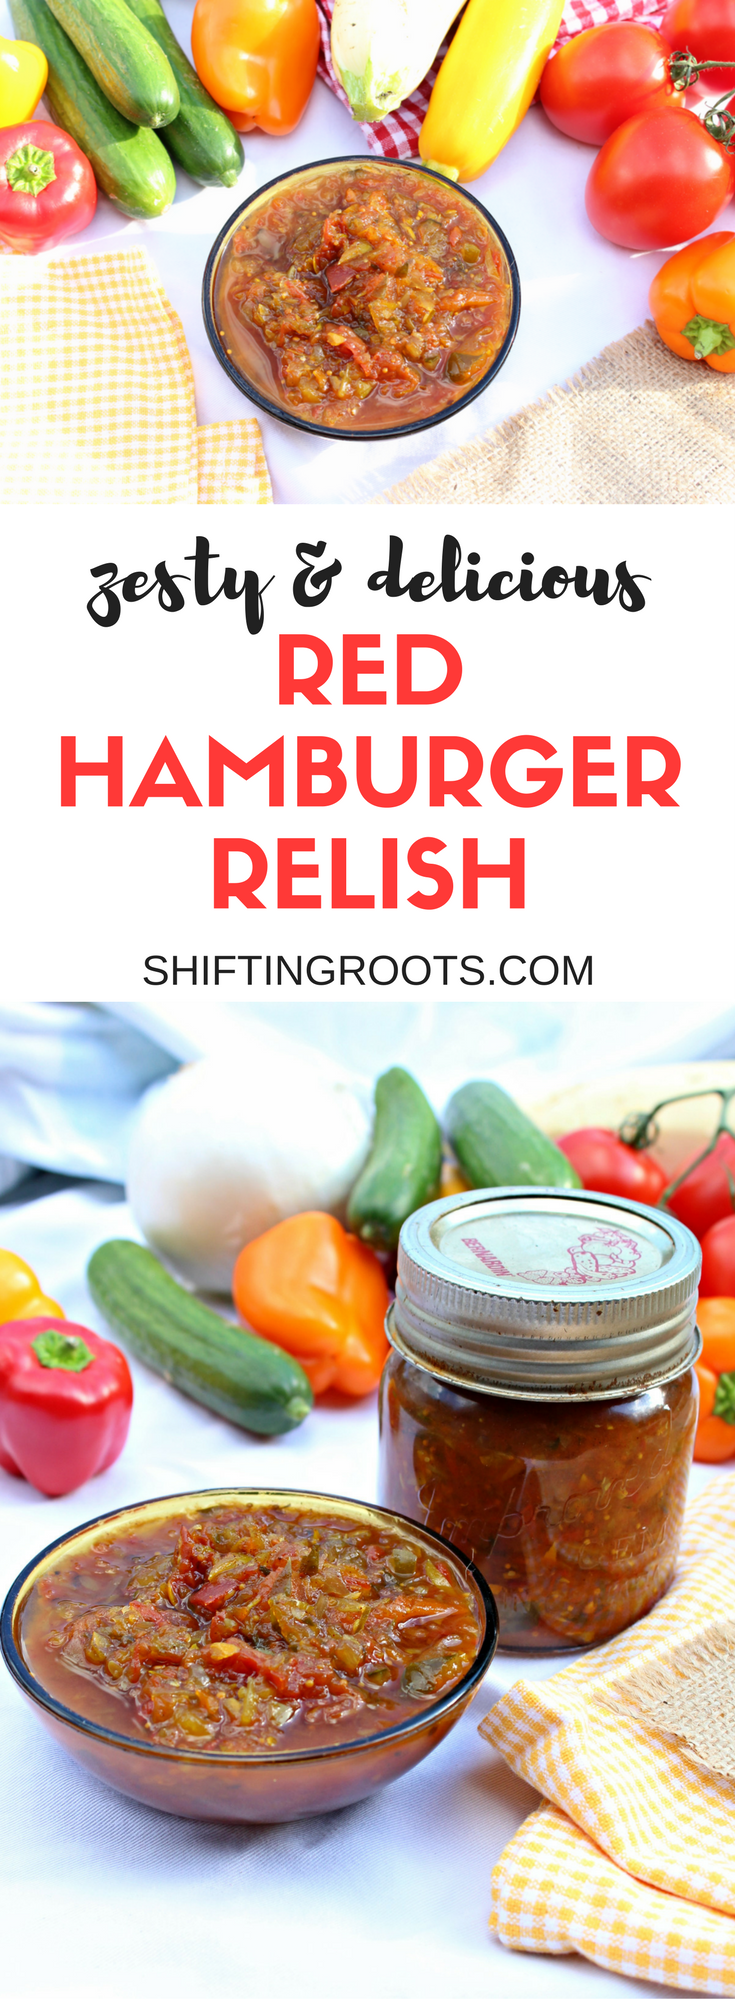 Red Hamburger relish is sweet sour and zesty! Tastes delicious on hamburgers and sausage, or any other meat. A delicious way to use your garden vegetables: cucumbers, tomatoes, zucchini, peppers, and onions